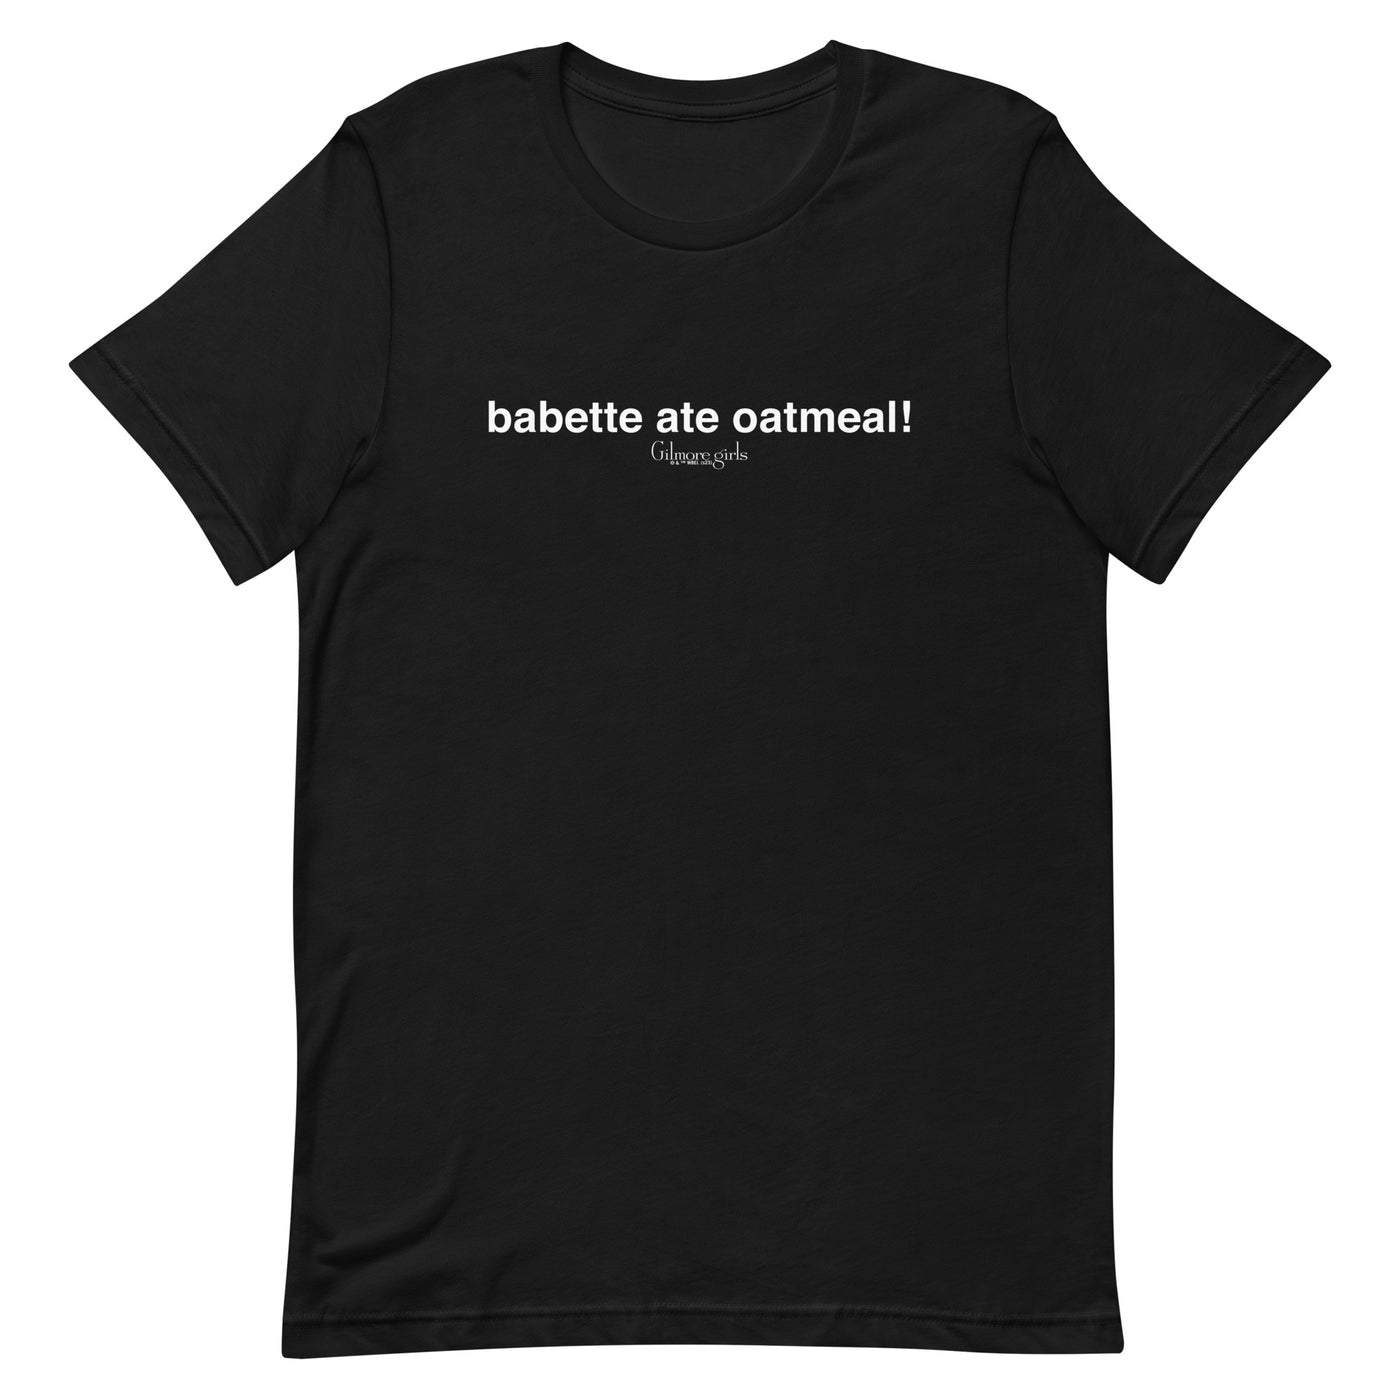 Gilmore Girls "Babette Ate Oatmeal!" Adult T-Shirt